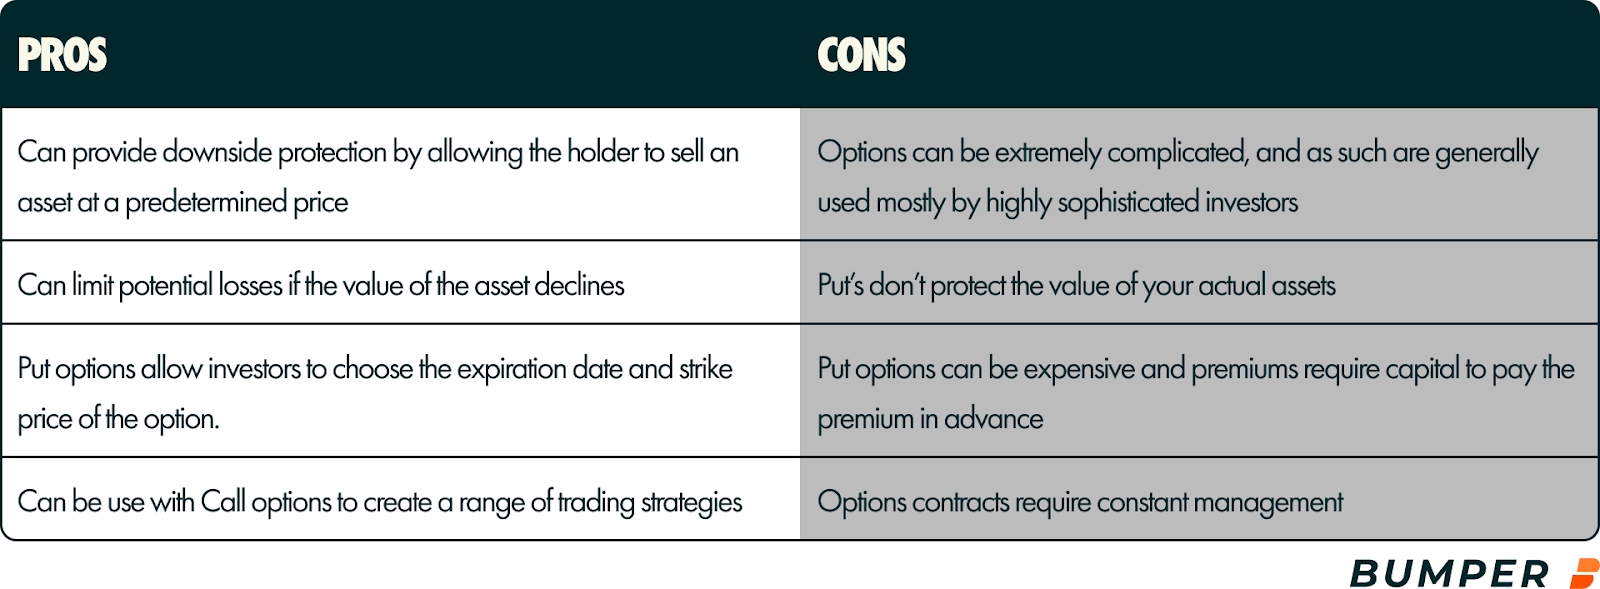 Pros and cons of put options